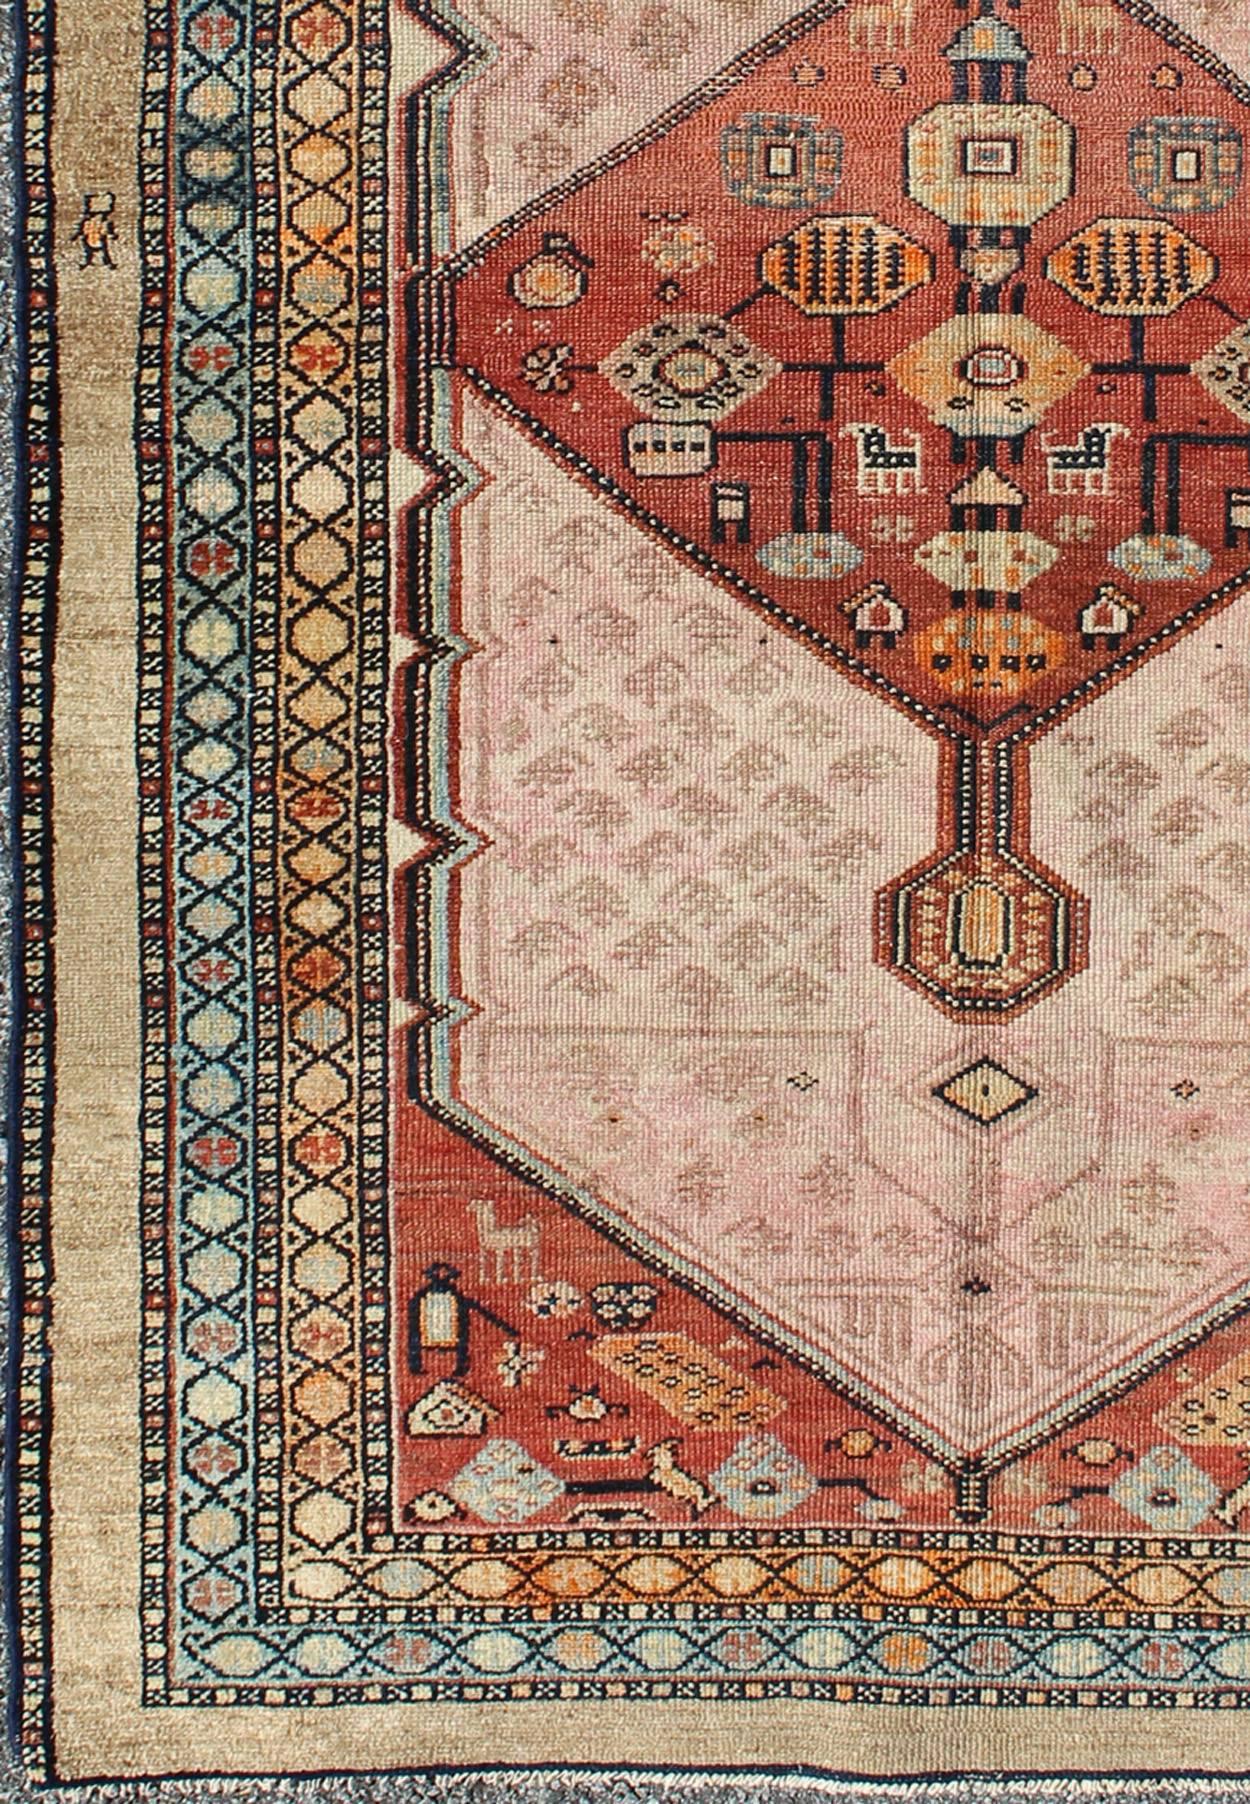 Serab antique rung from Persia with geometric medallions and ornate multi-tiered border, Keivan Woven Arts / rug H8-1001, country of origin / type: Iran / Serab, circa 1890.

This antique Serab carpet from late 19th century Persia features a